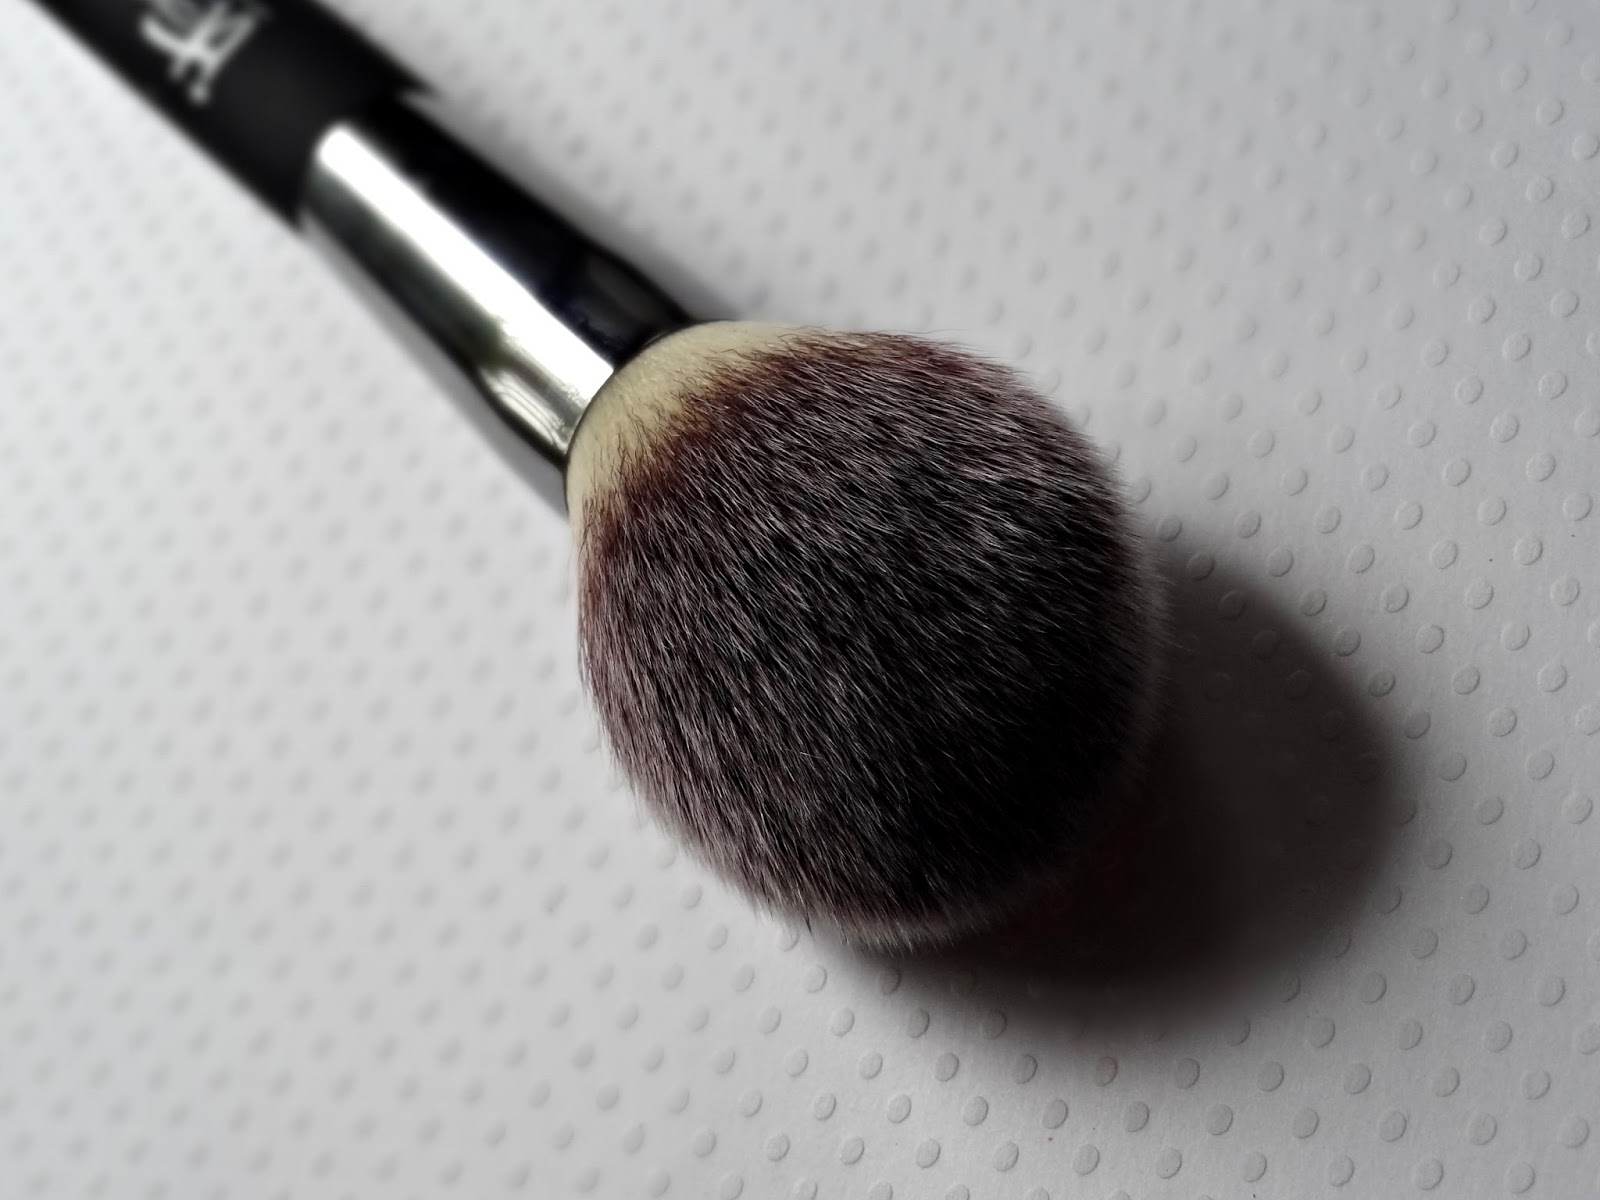 IT Cosmetics CC+ Radiance Palette and Heavenly Luxe Wand Ball Brush Review, Photos & Swatches